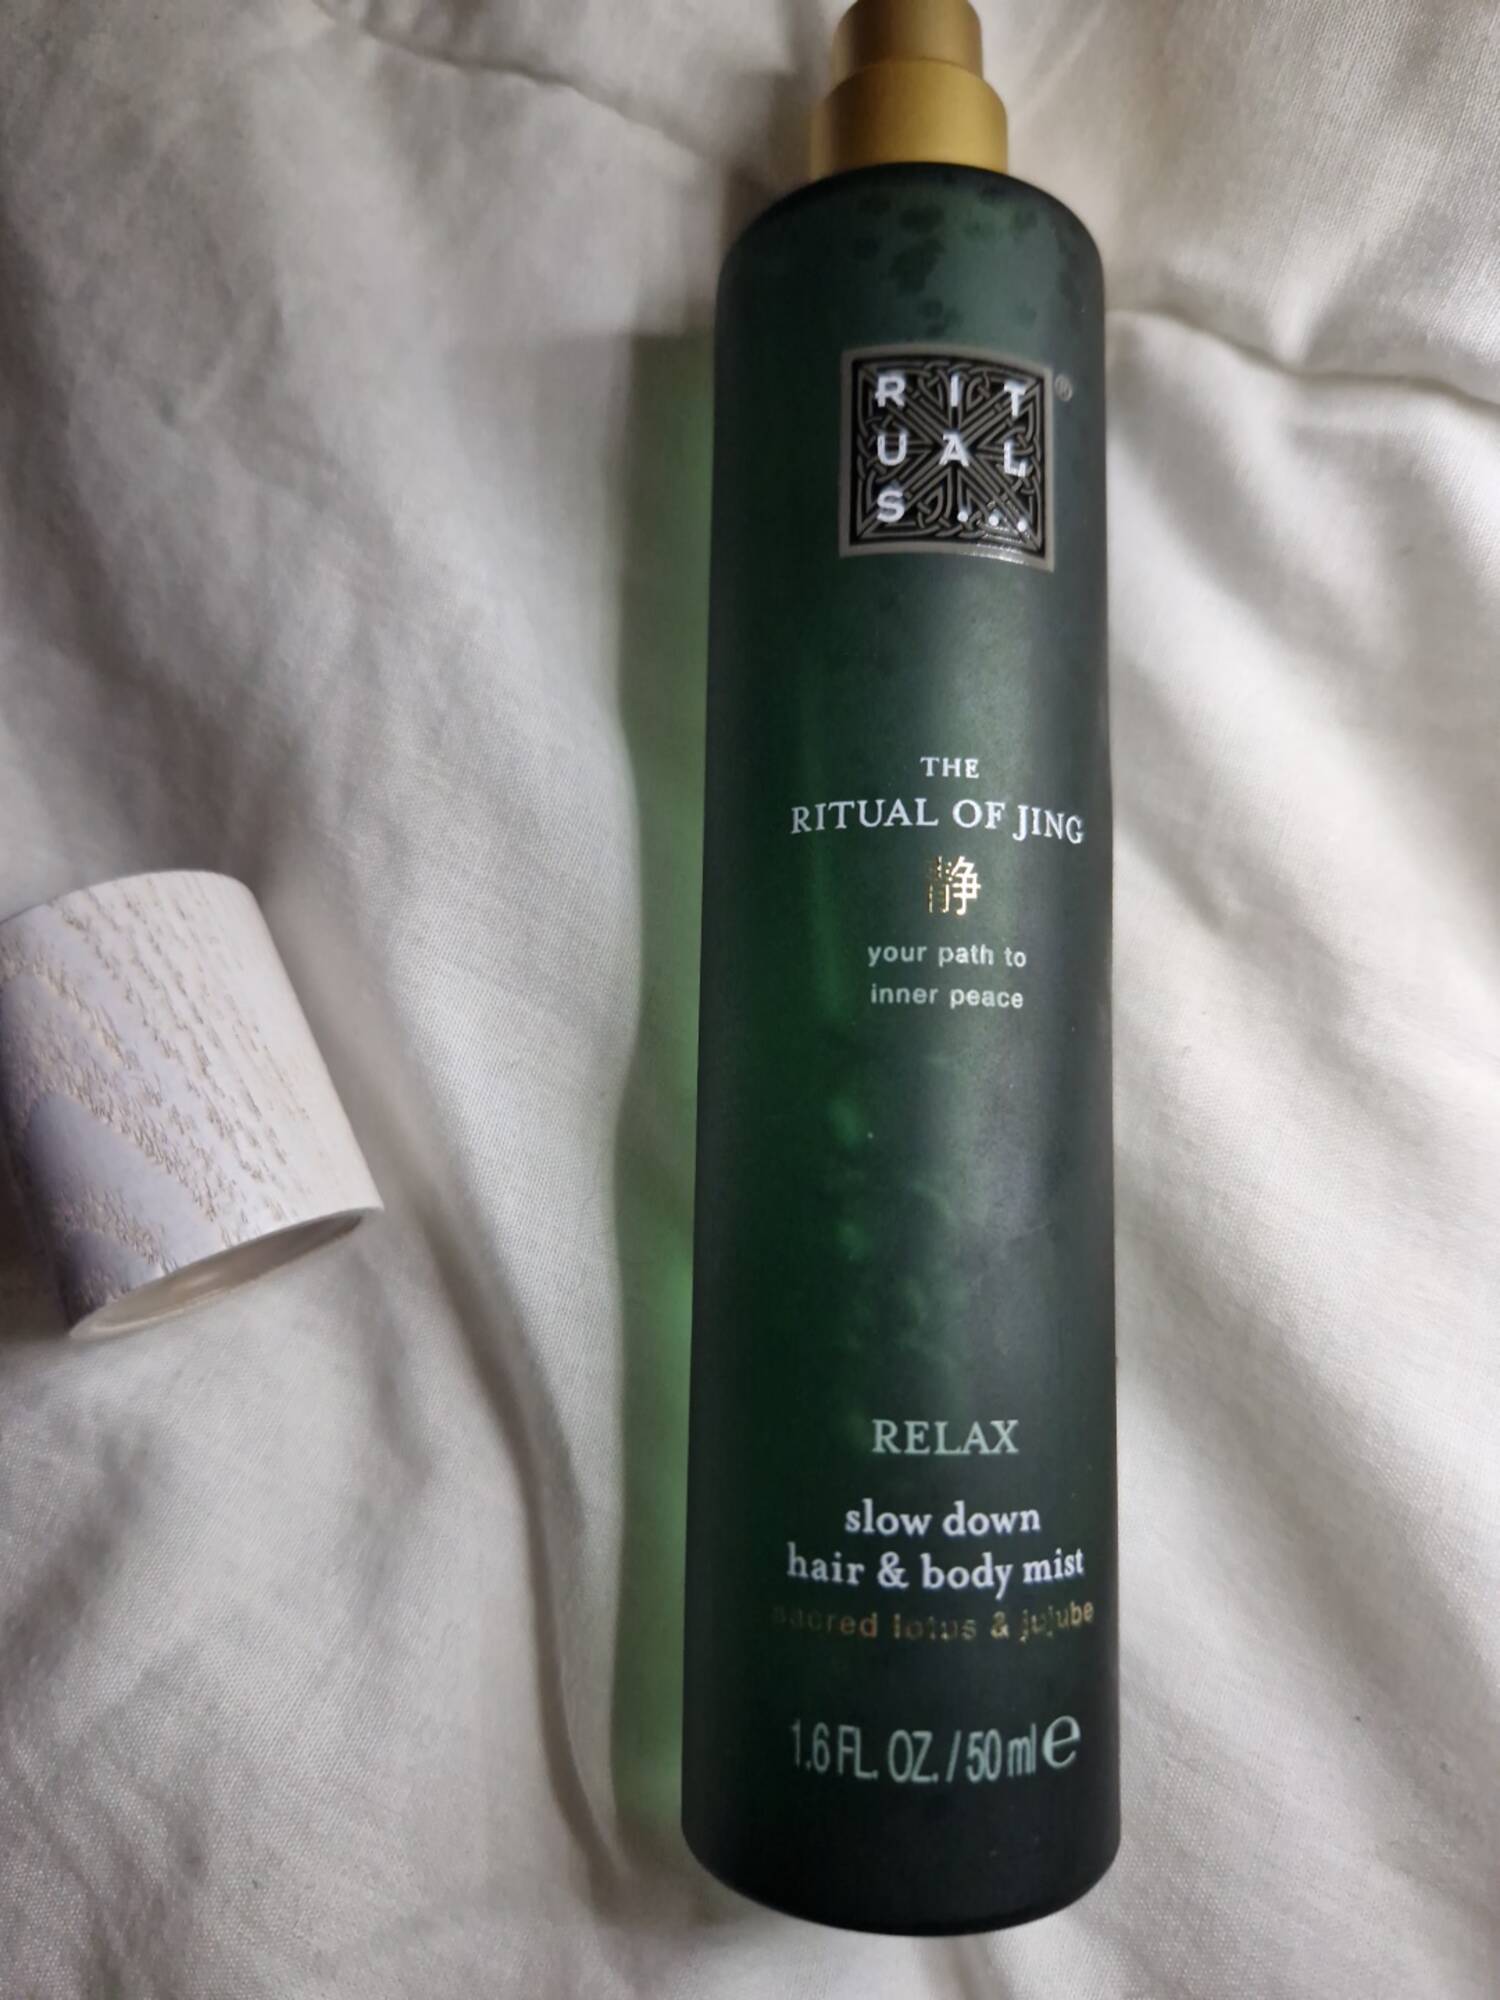 RITUALS - The ritual of Jing - Relax slow down hair & body mist